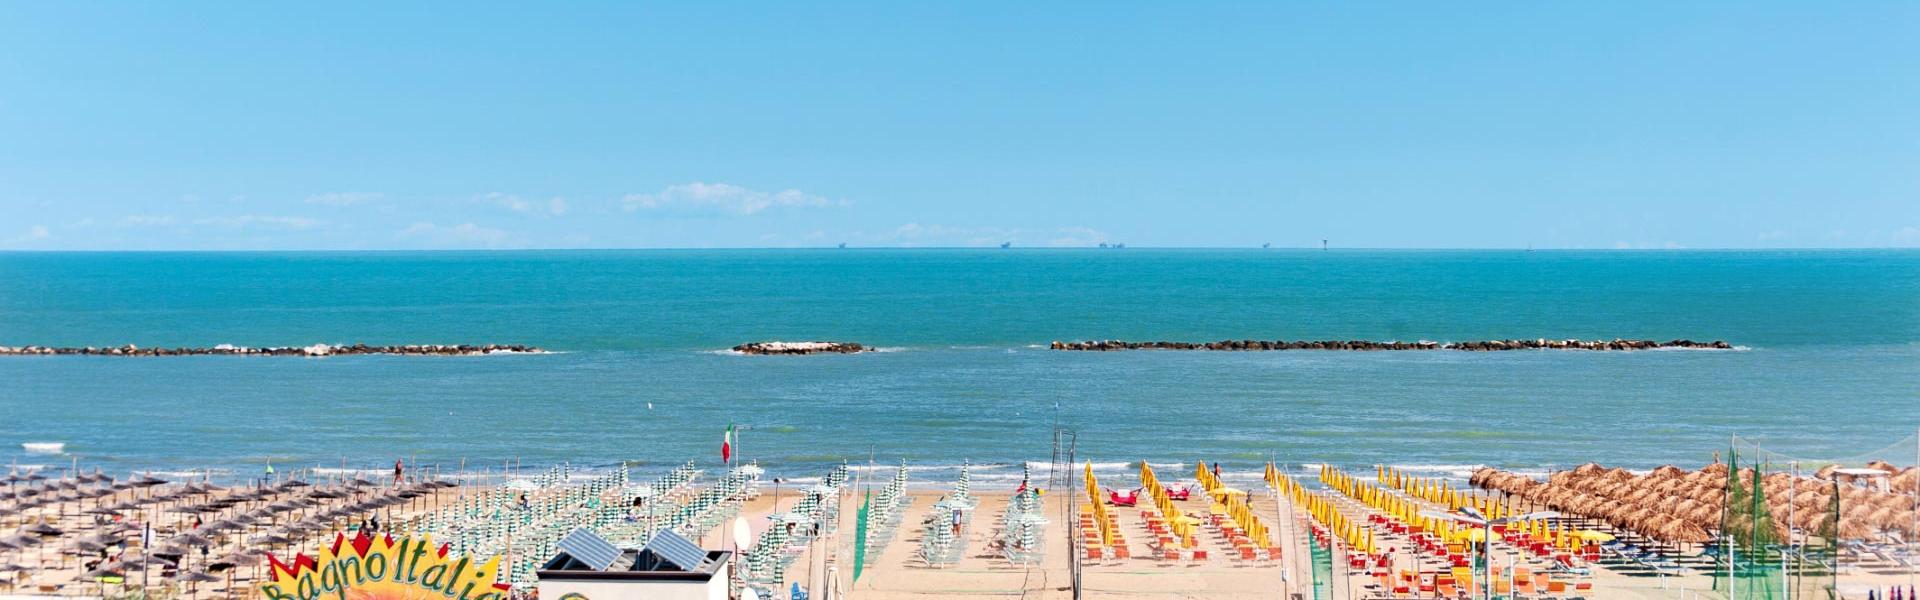 hotelbisanzio en 1-en-255847-offer-end-of-may-all-inclusive-cesenatico-with-free-child-up-to-10-years 004